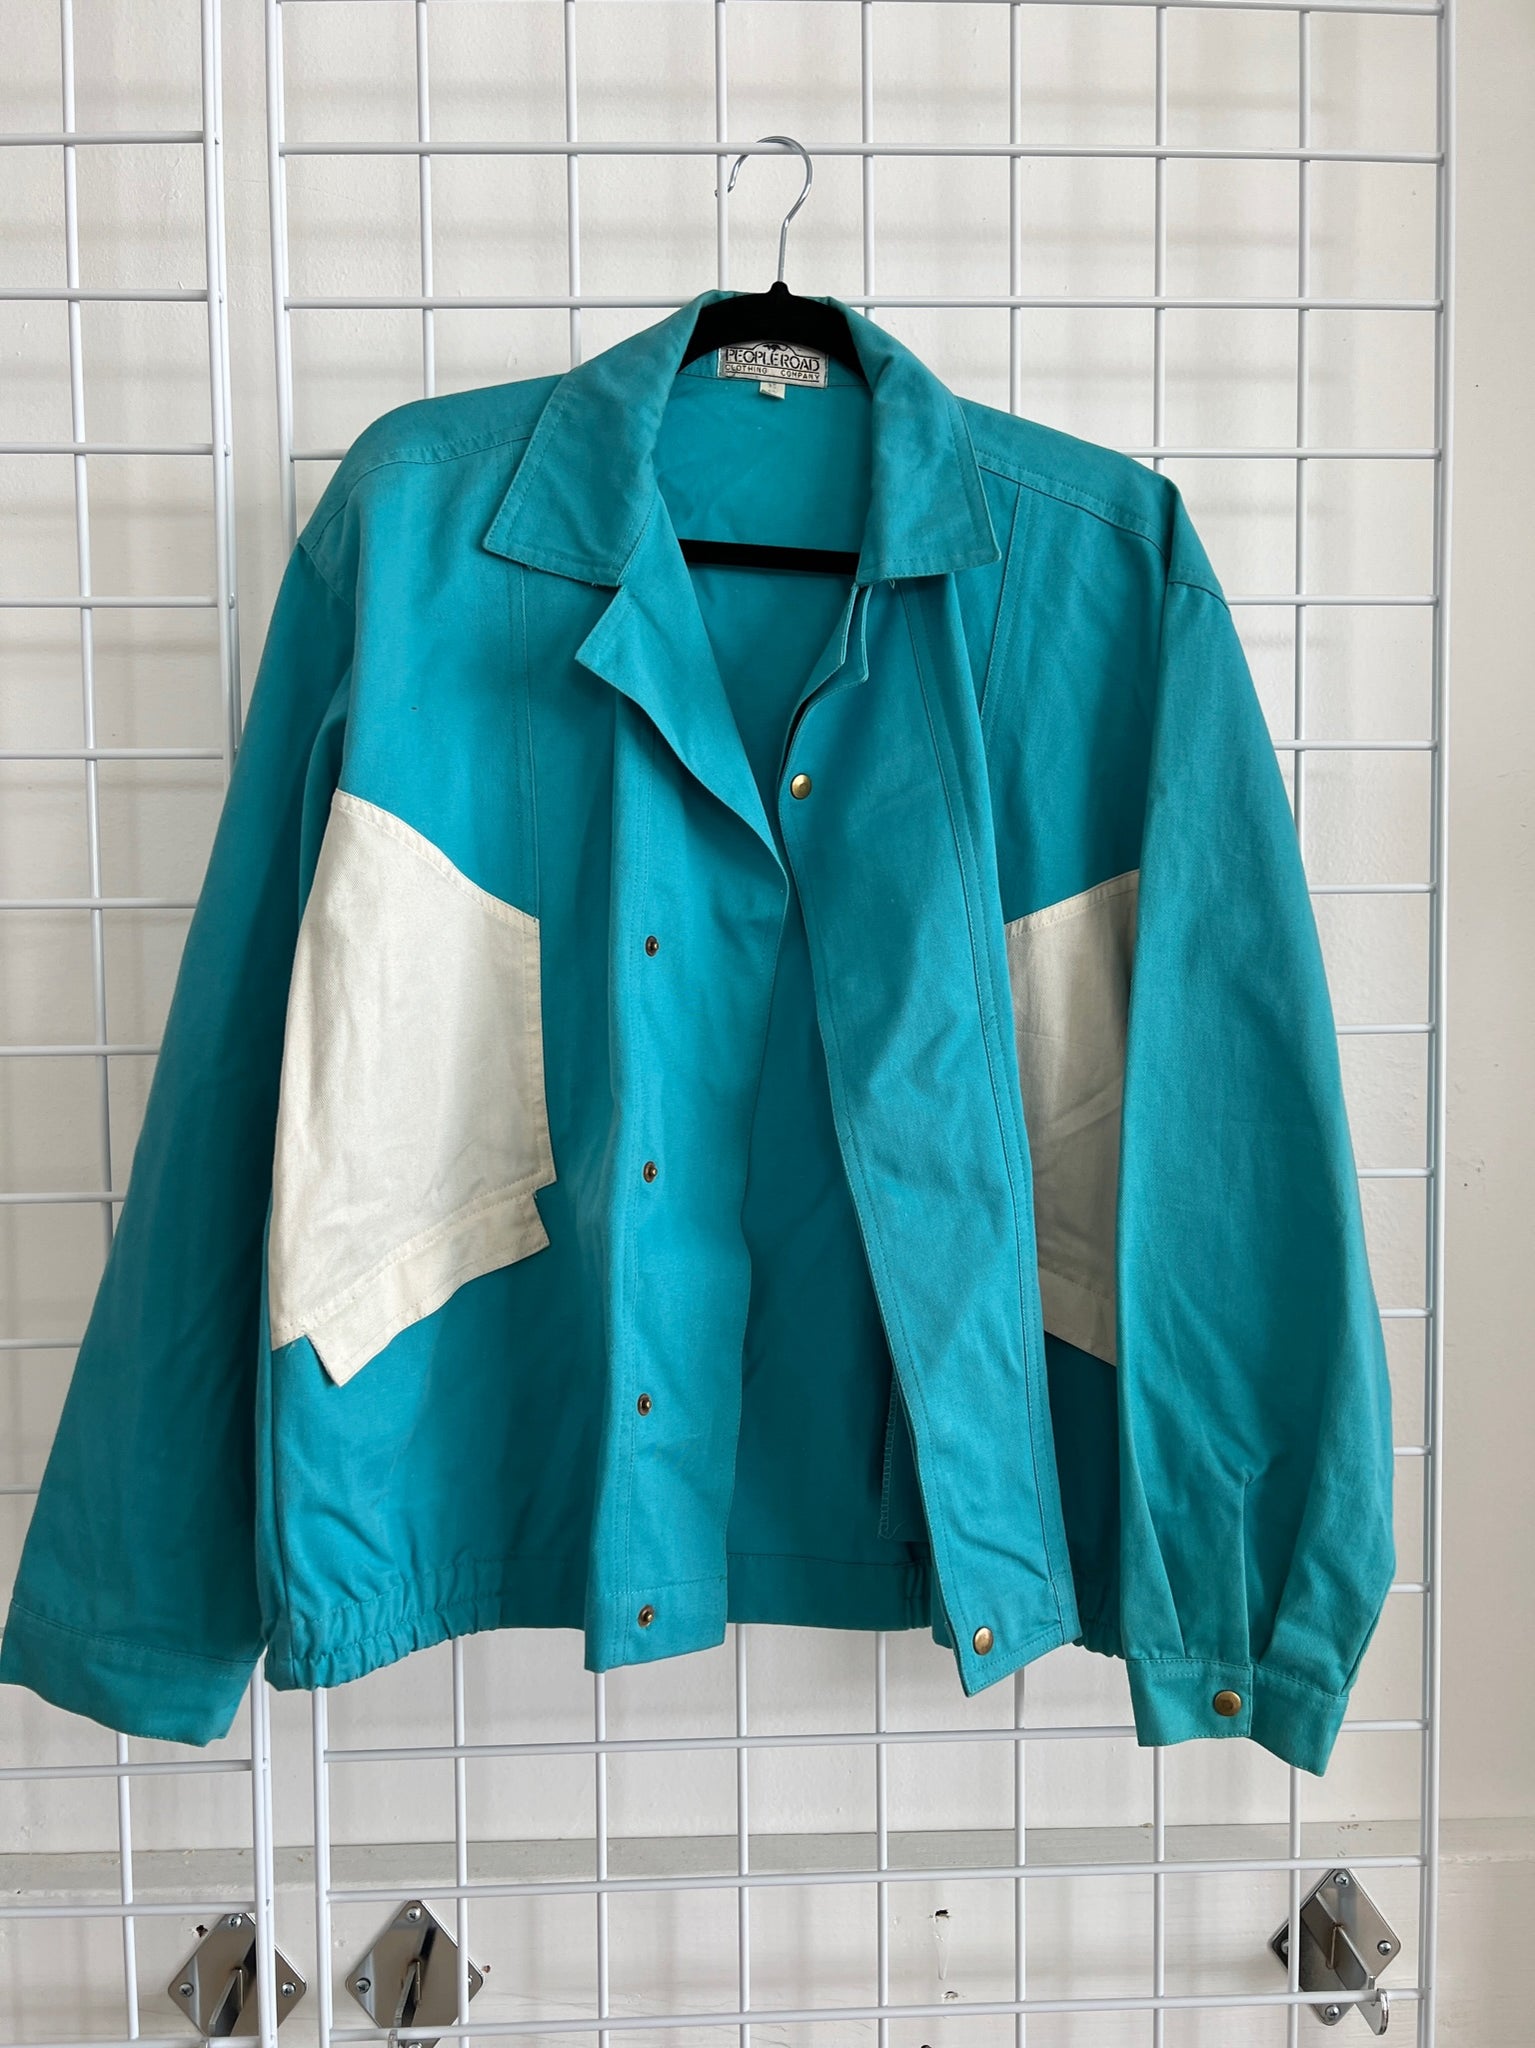 1980s MENS JACKET-People Road turquiose w/ white details